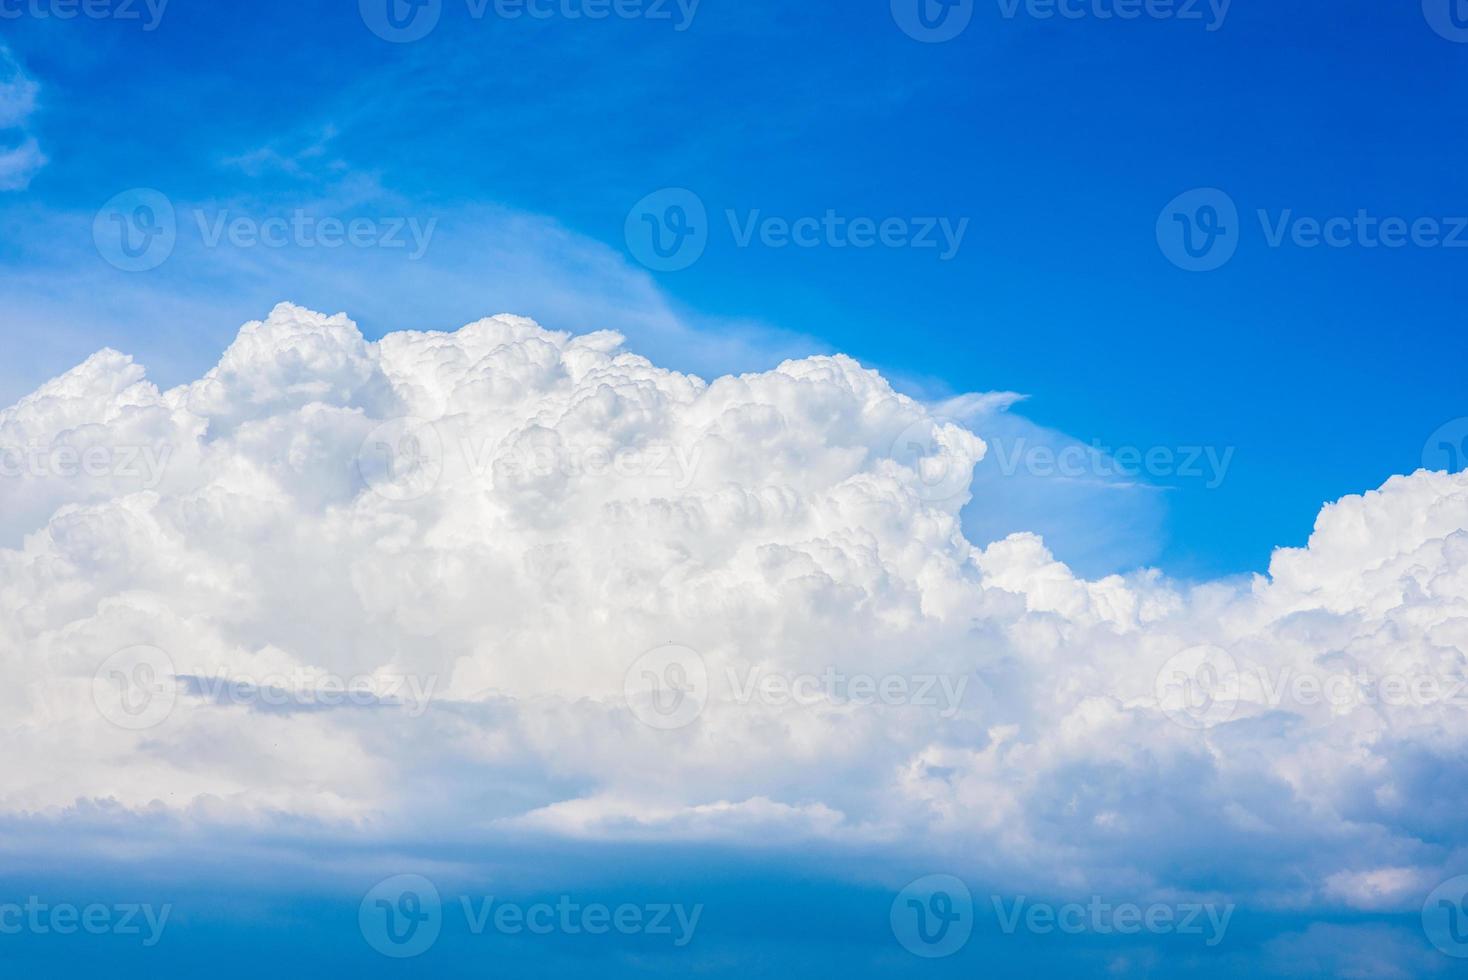 Beautiful white clouds in a bright blue sky on a warm summer day photo